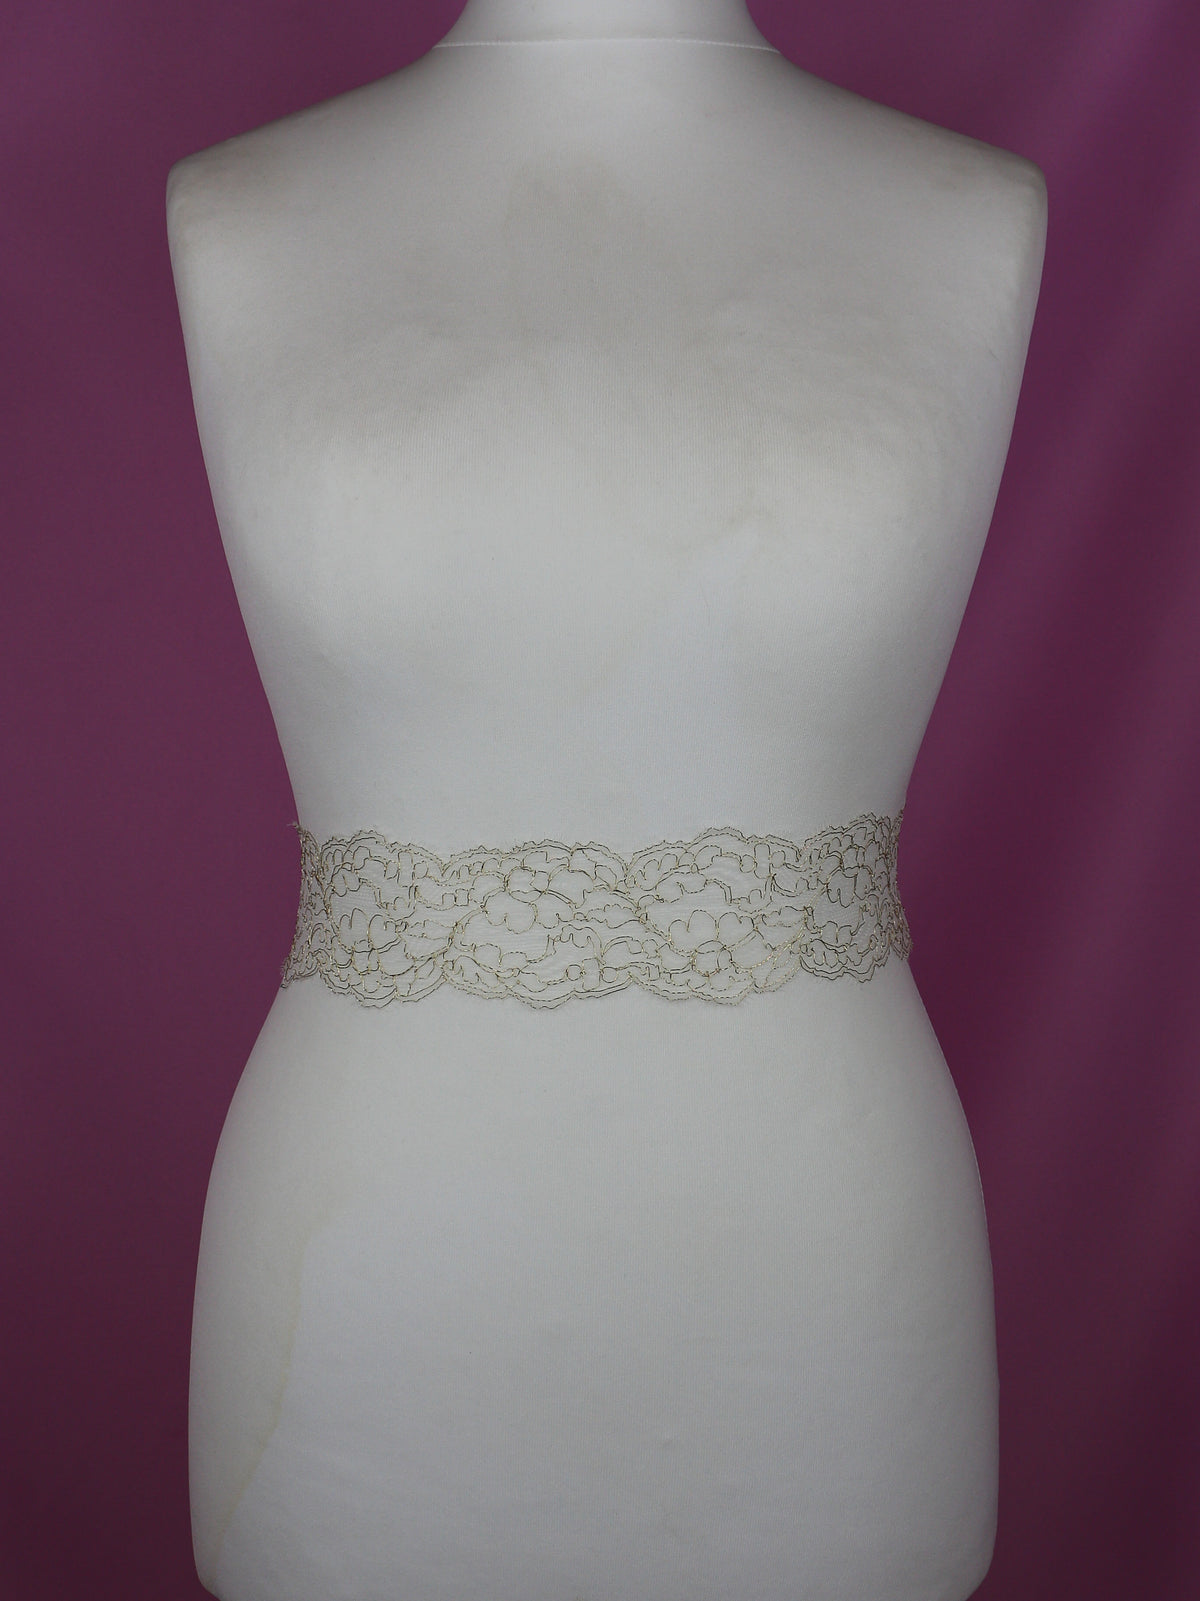 Ivory & Gold Chantilly Lace Trim - Evelyn